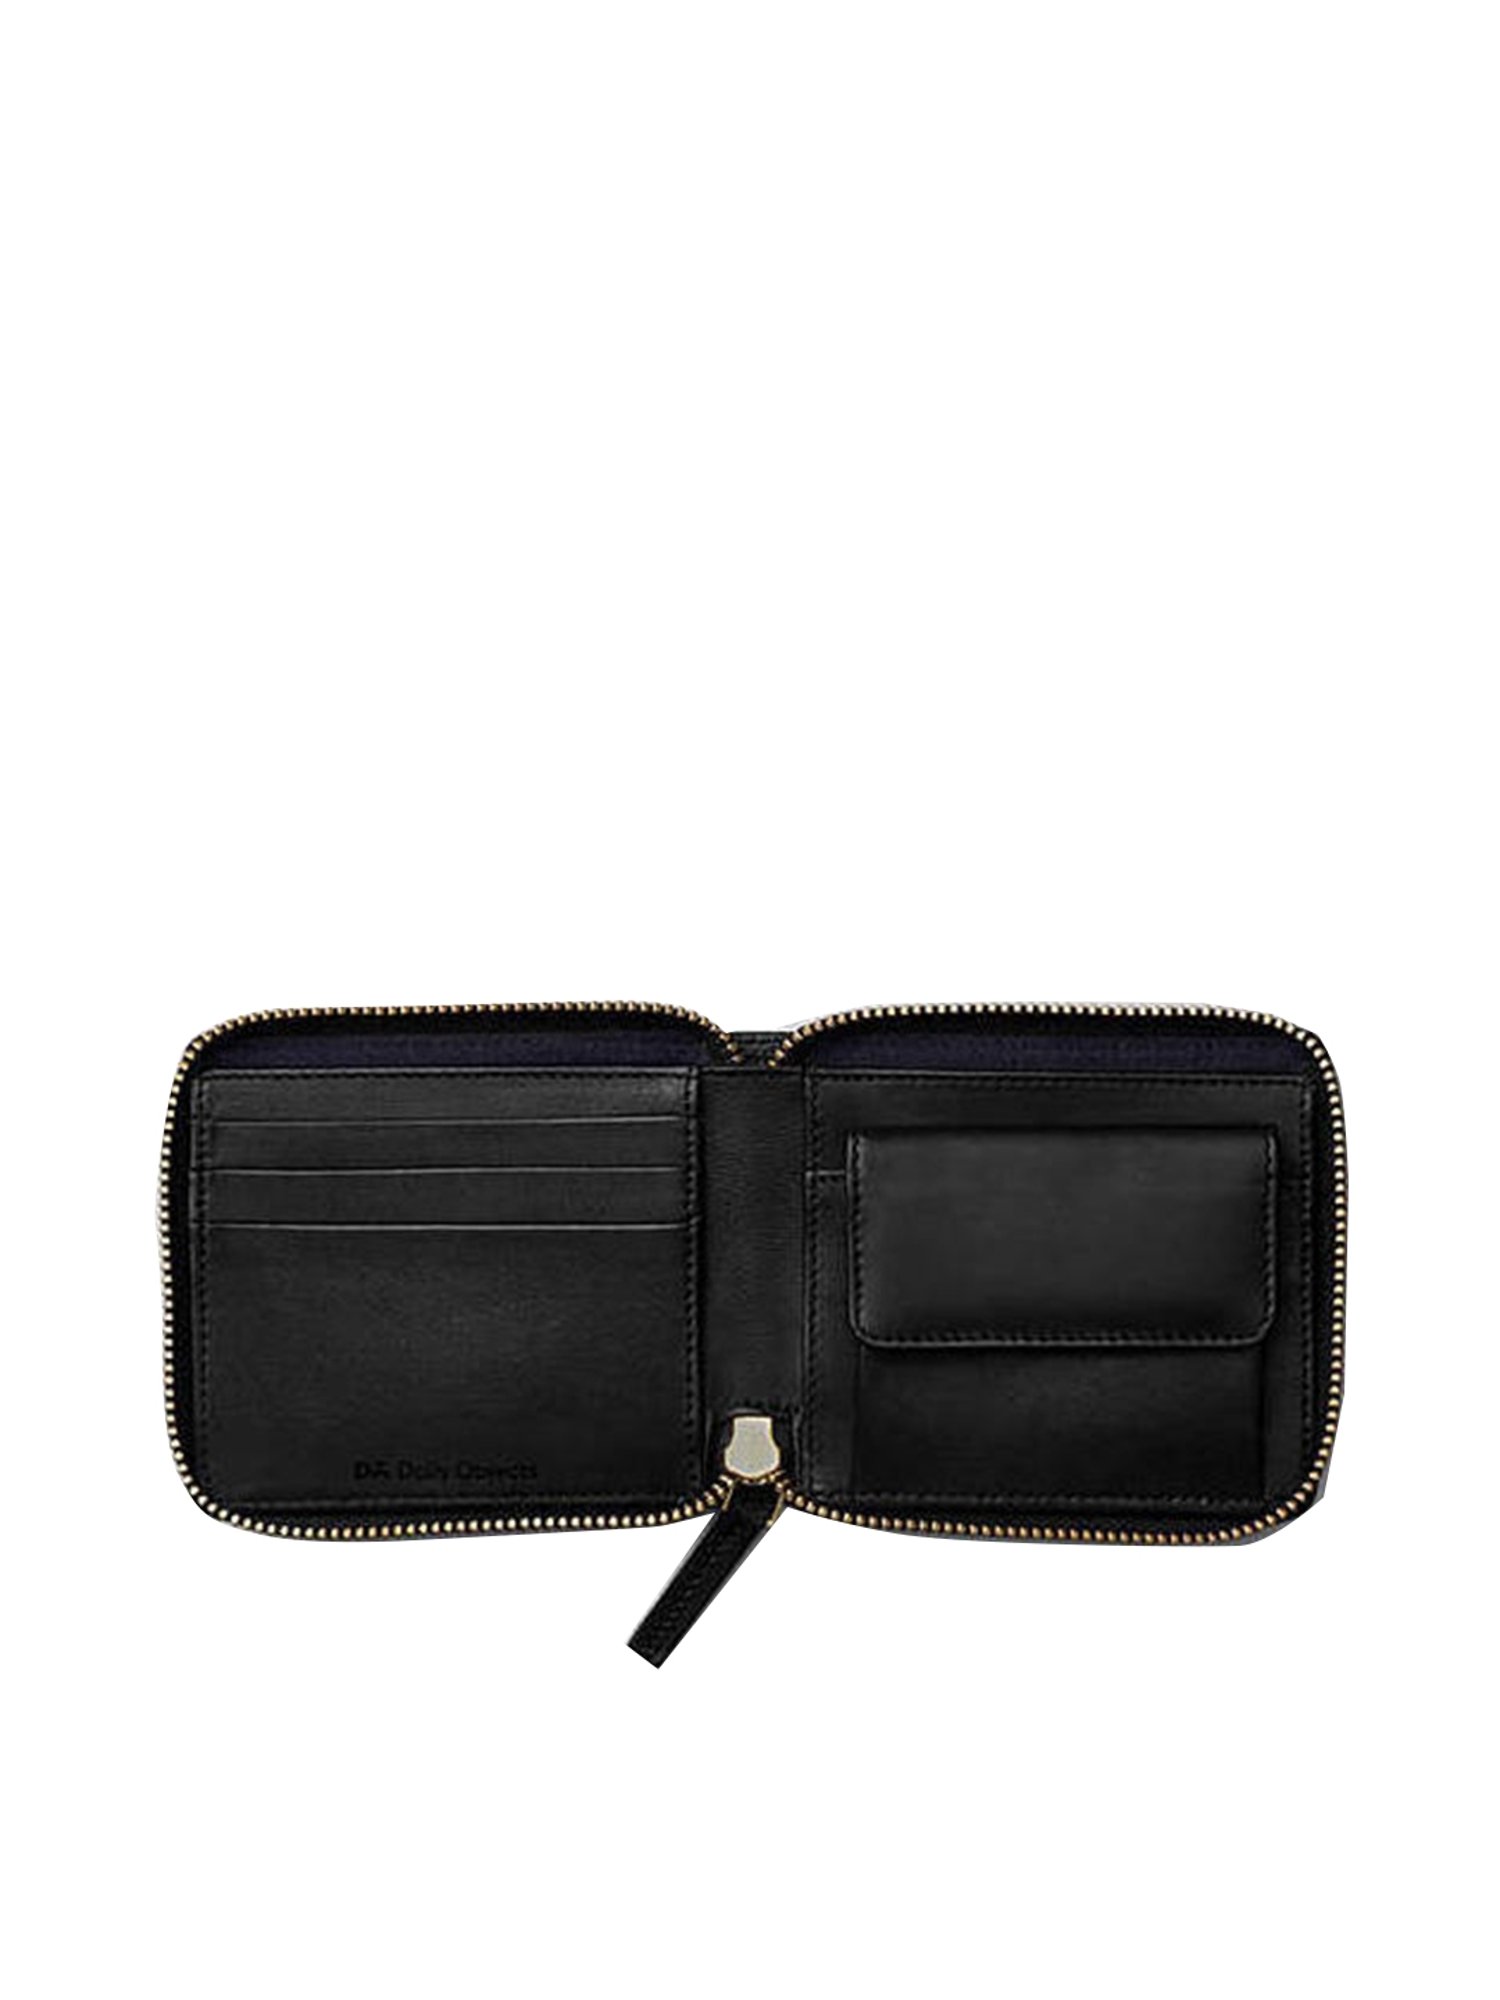 Buy DailyObjects Feathers 35 Zip Around Wallet for Women For Women At Best  Price @ Tata CLiQ